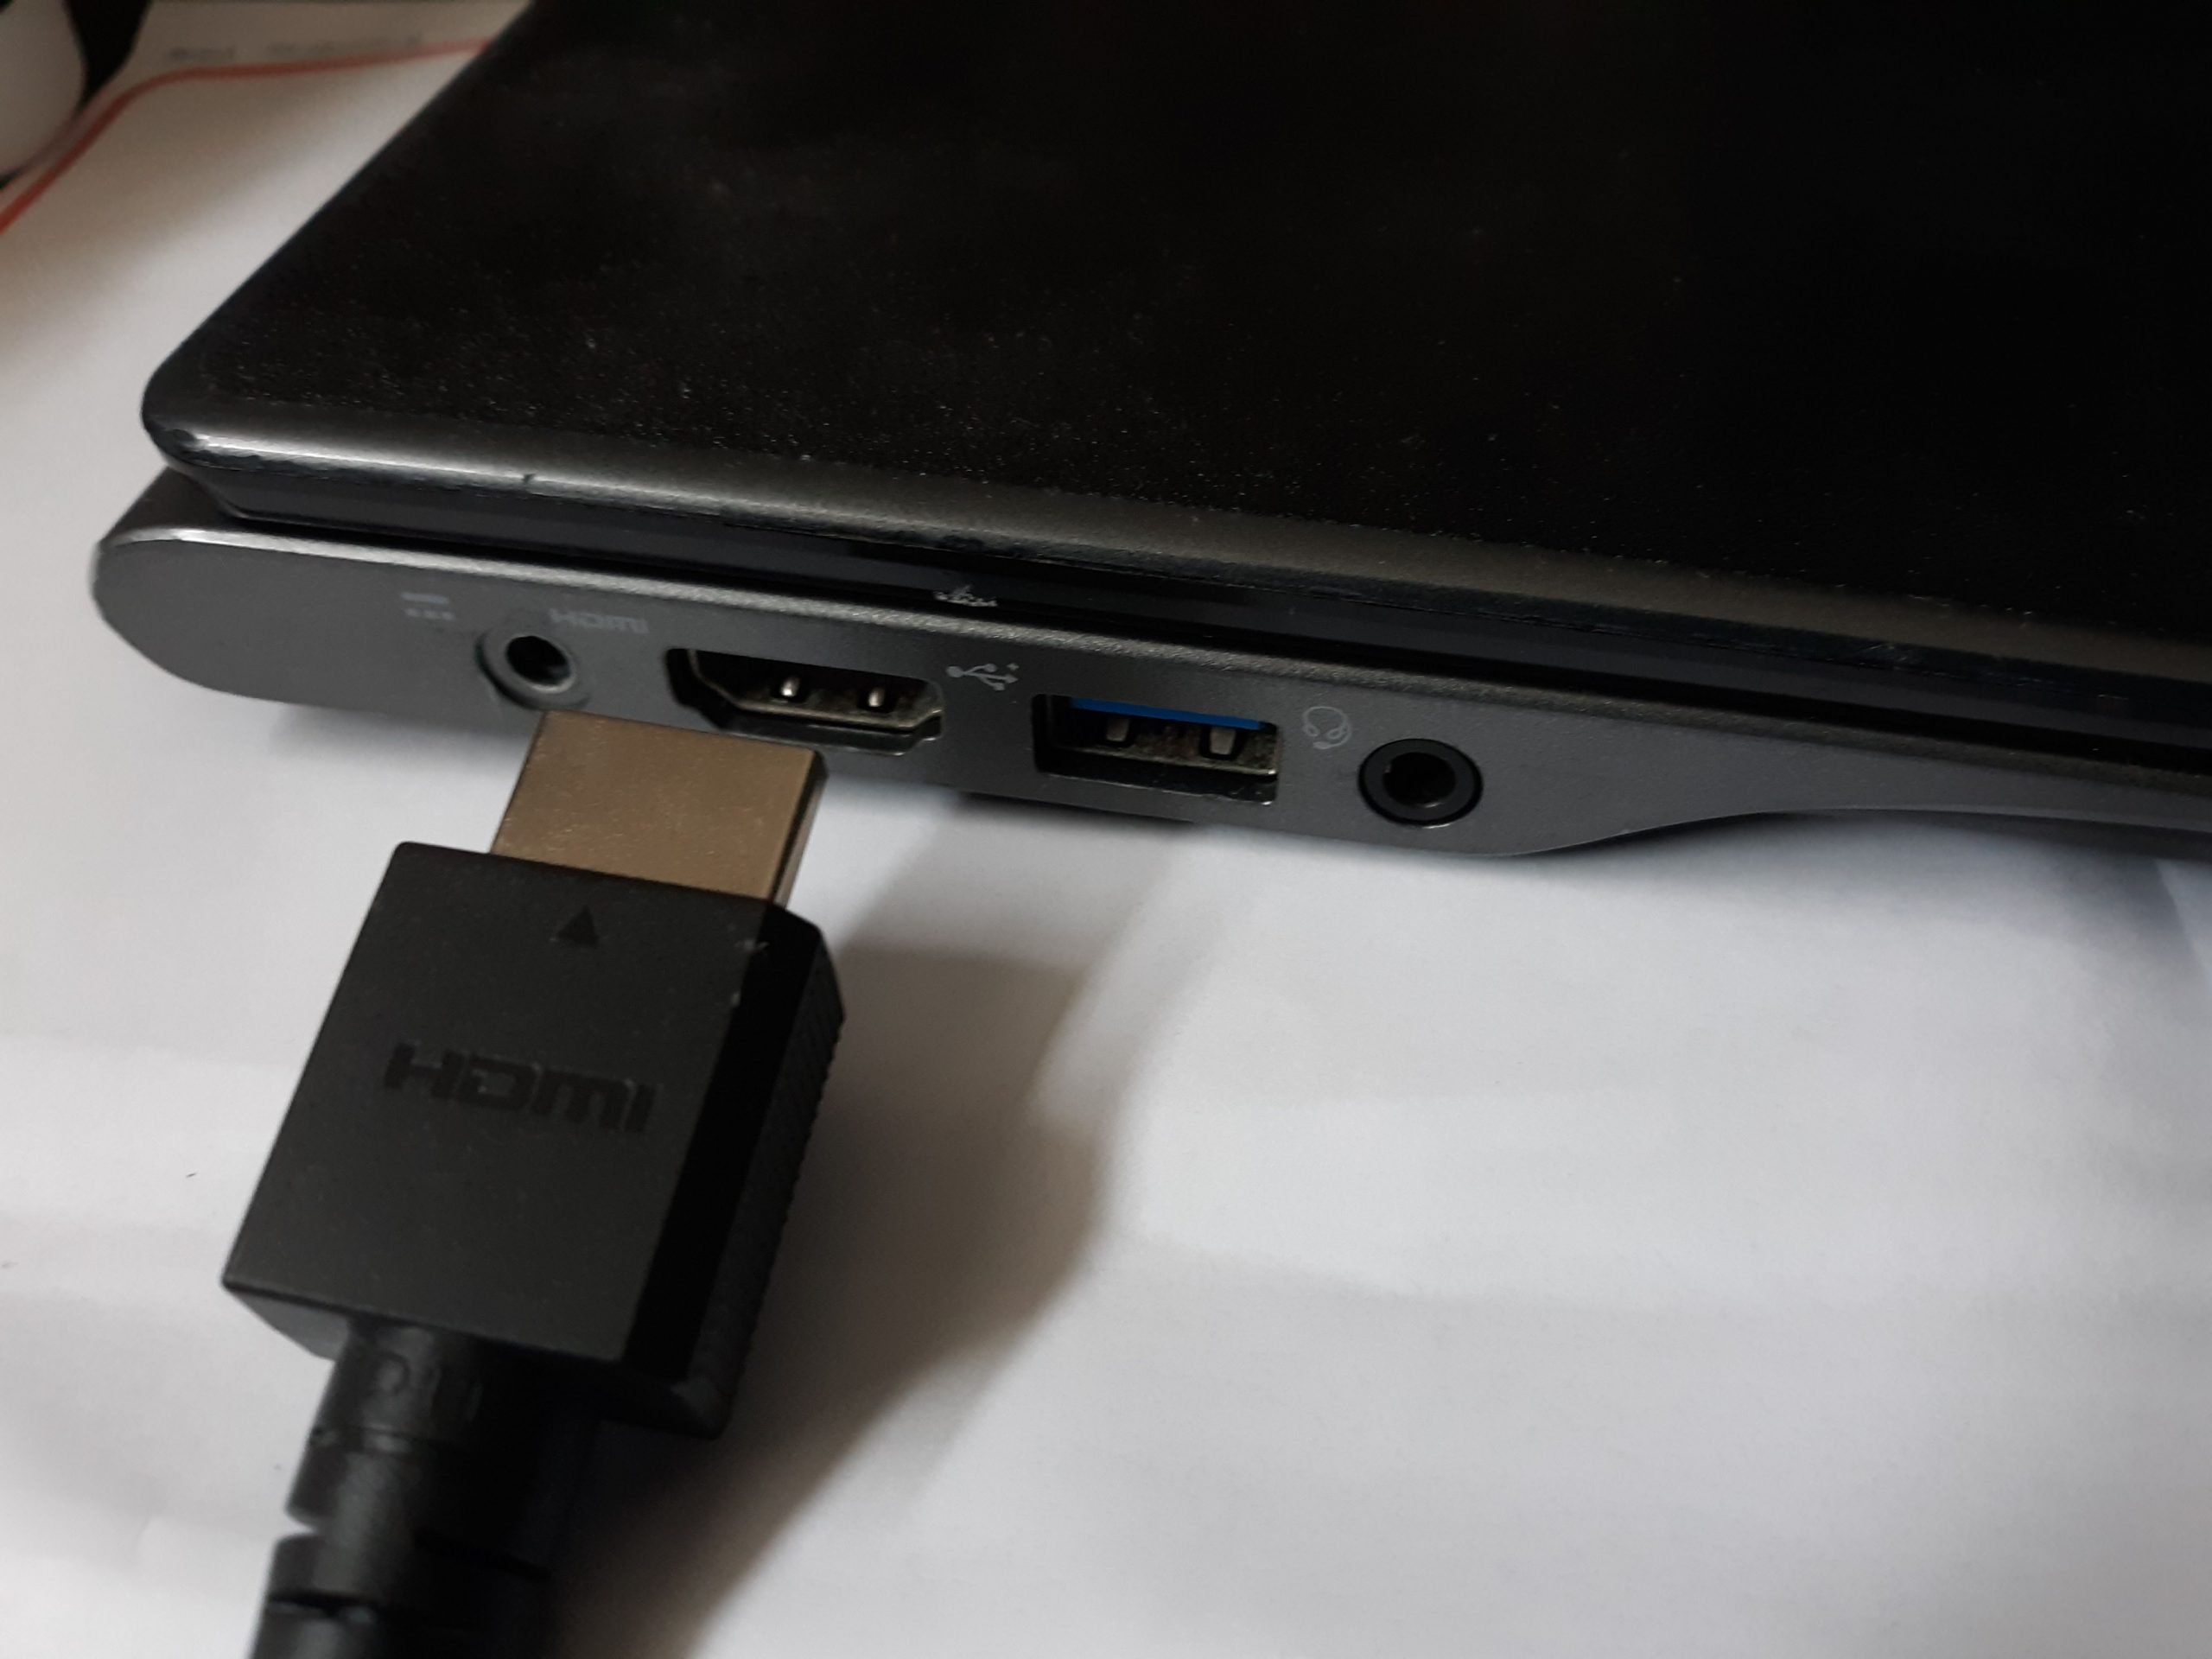 How to Connect Chromebook to Your TV